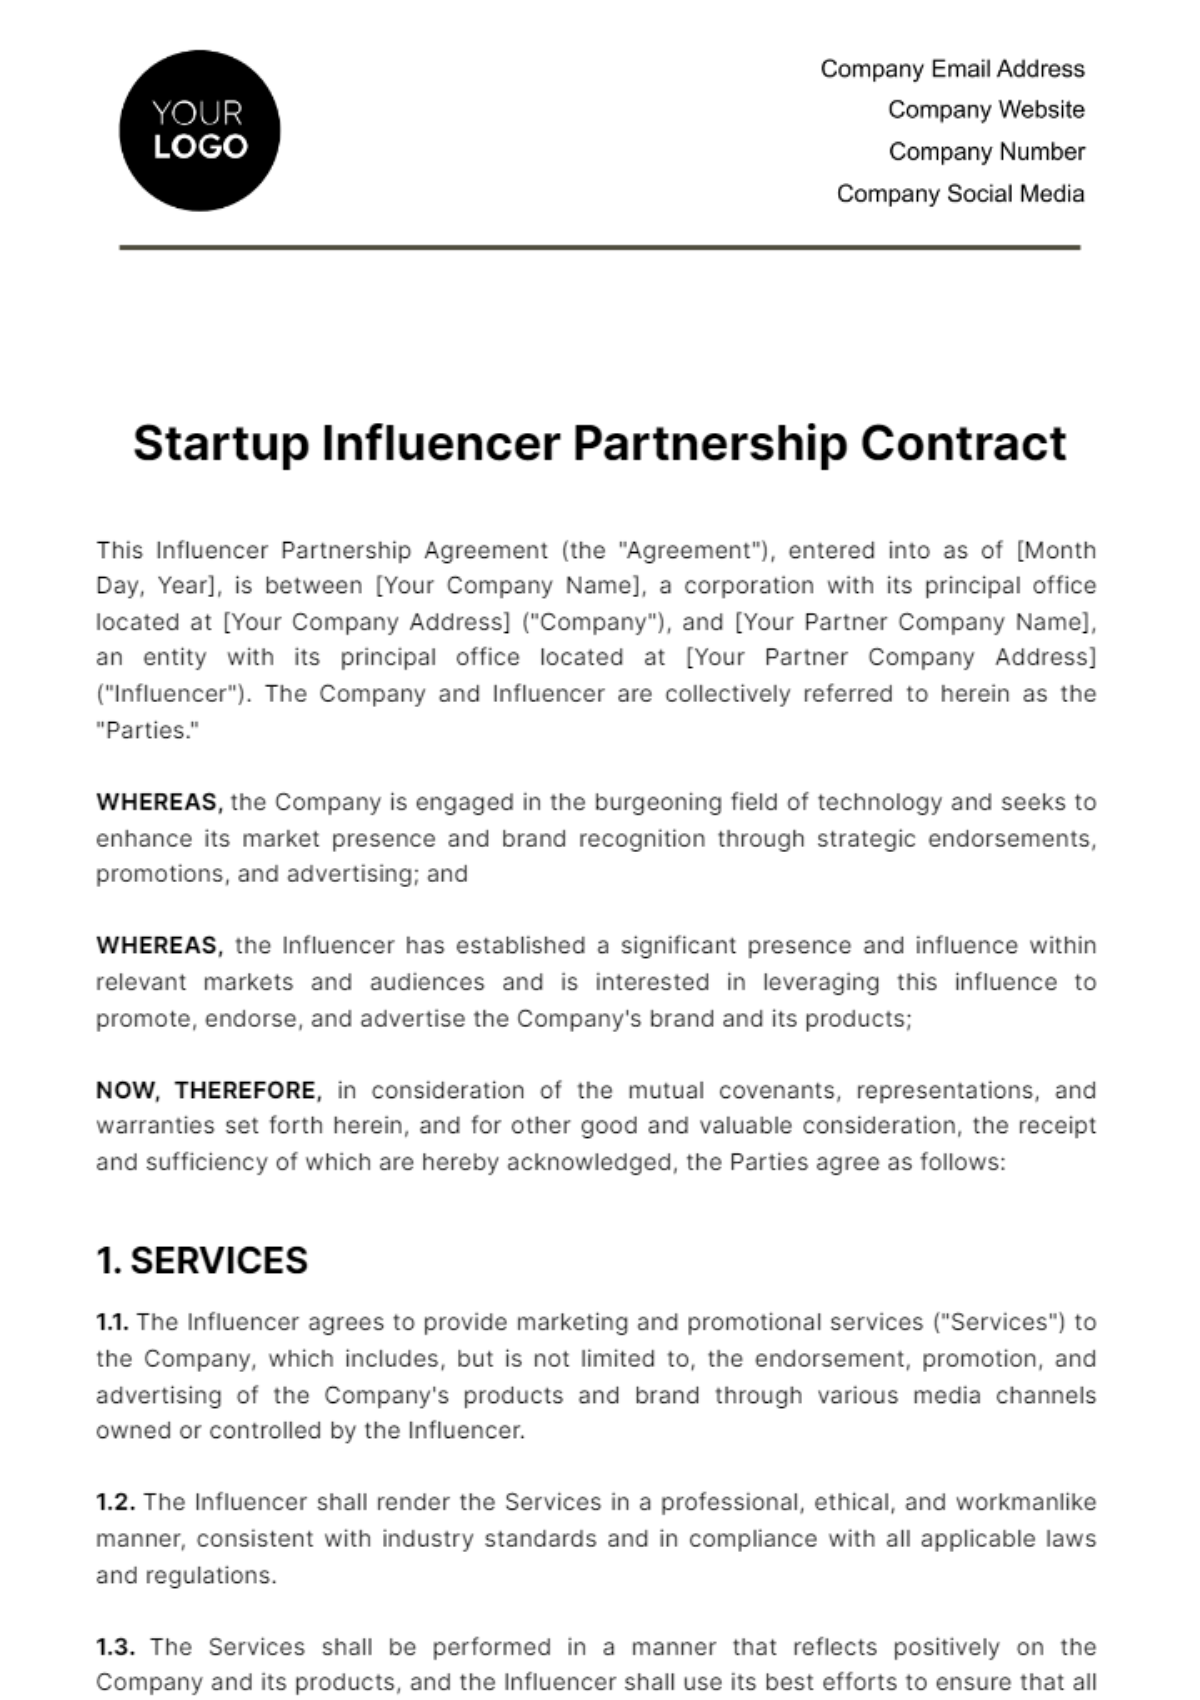 Startup Influencer Partnership Contract Template